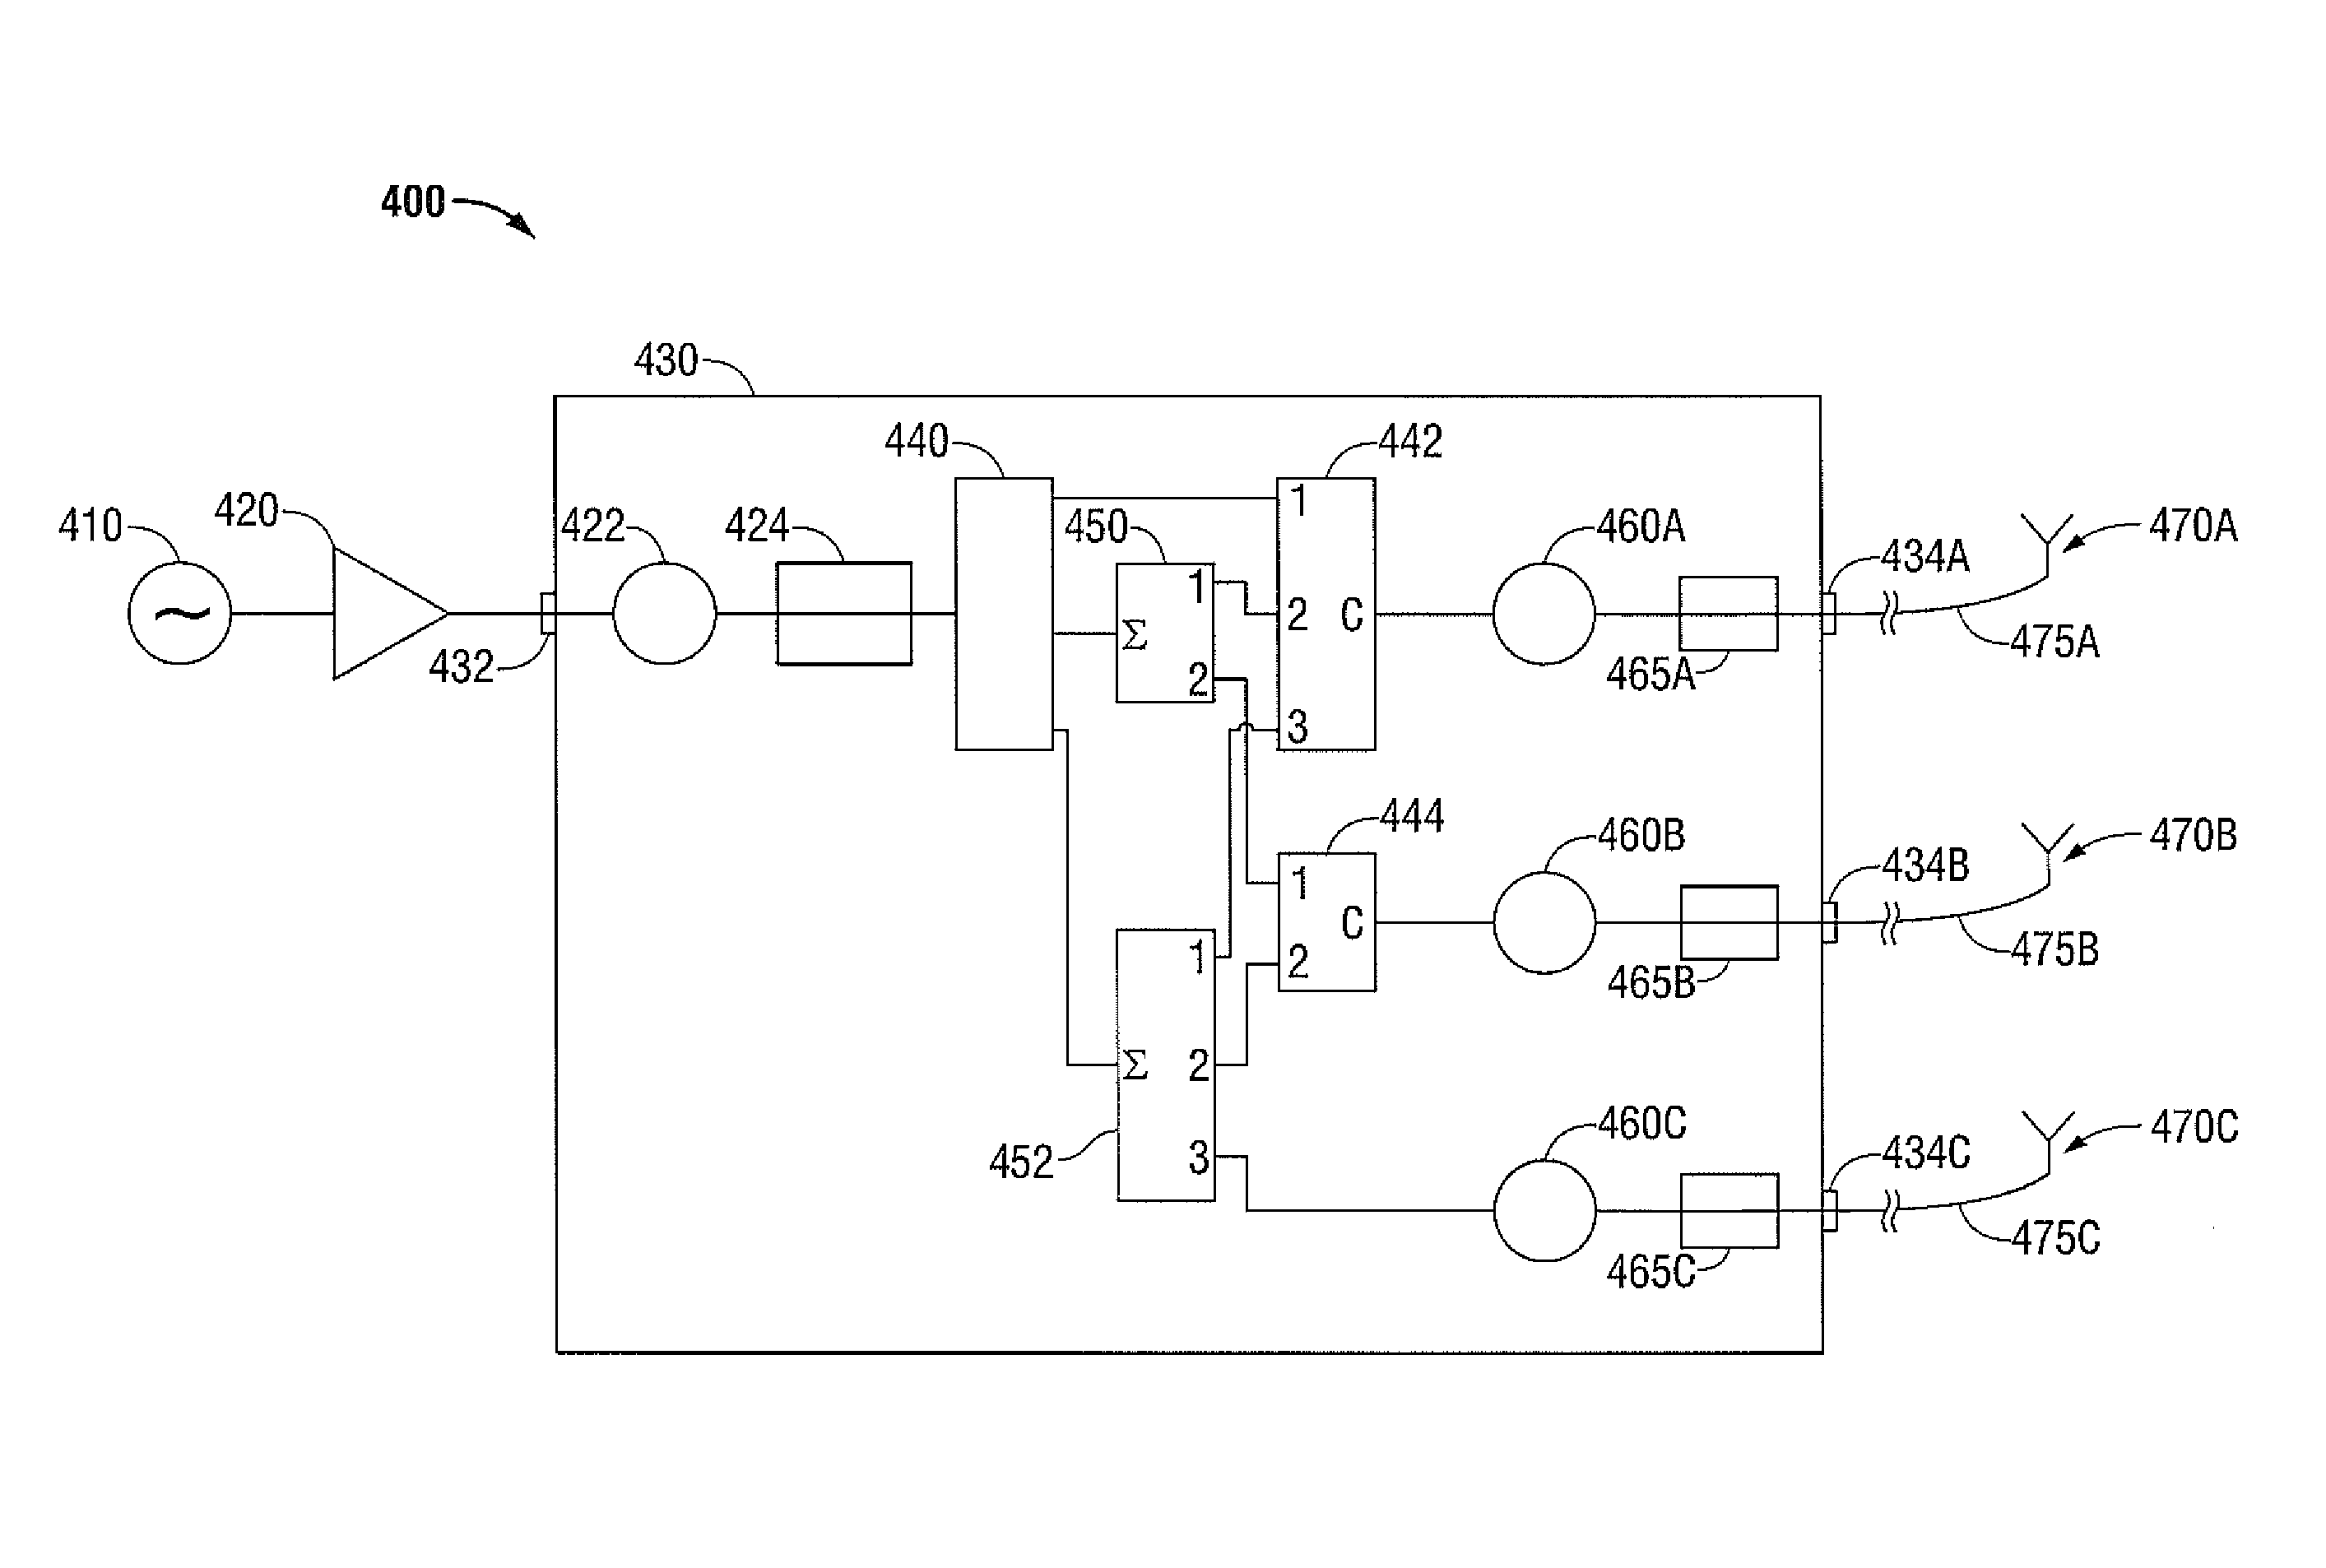 Tissue ablation system with energy distribution